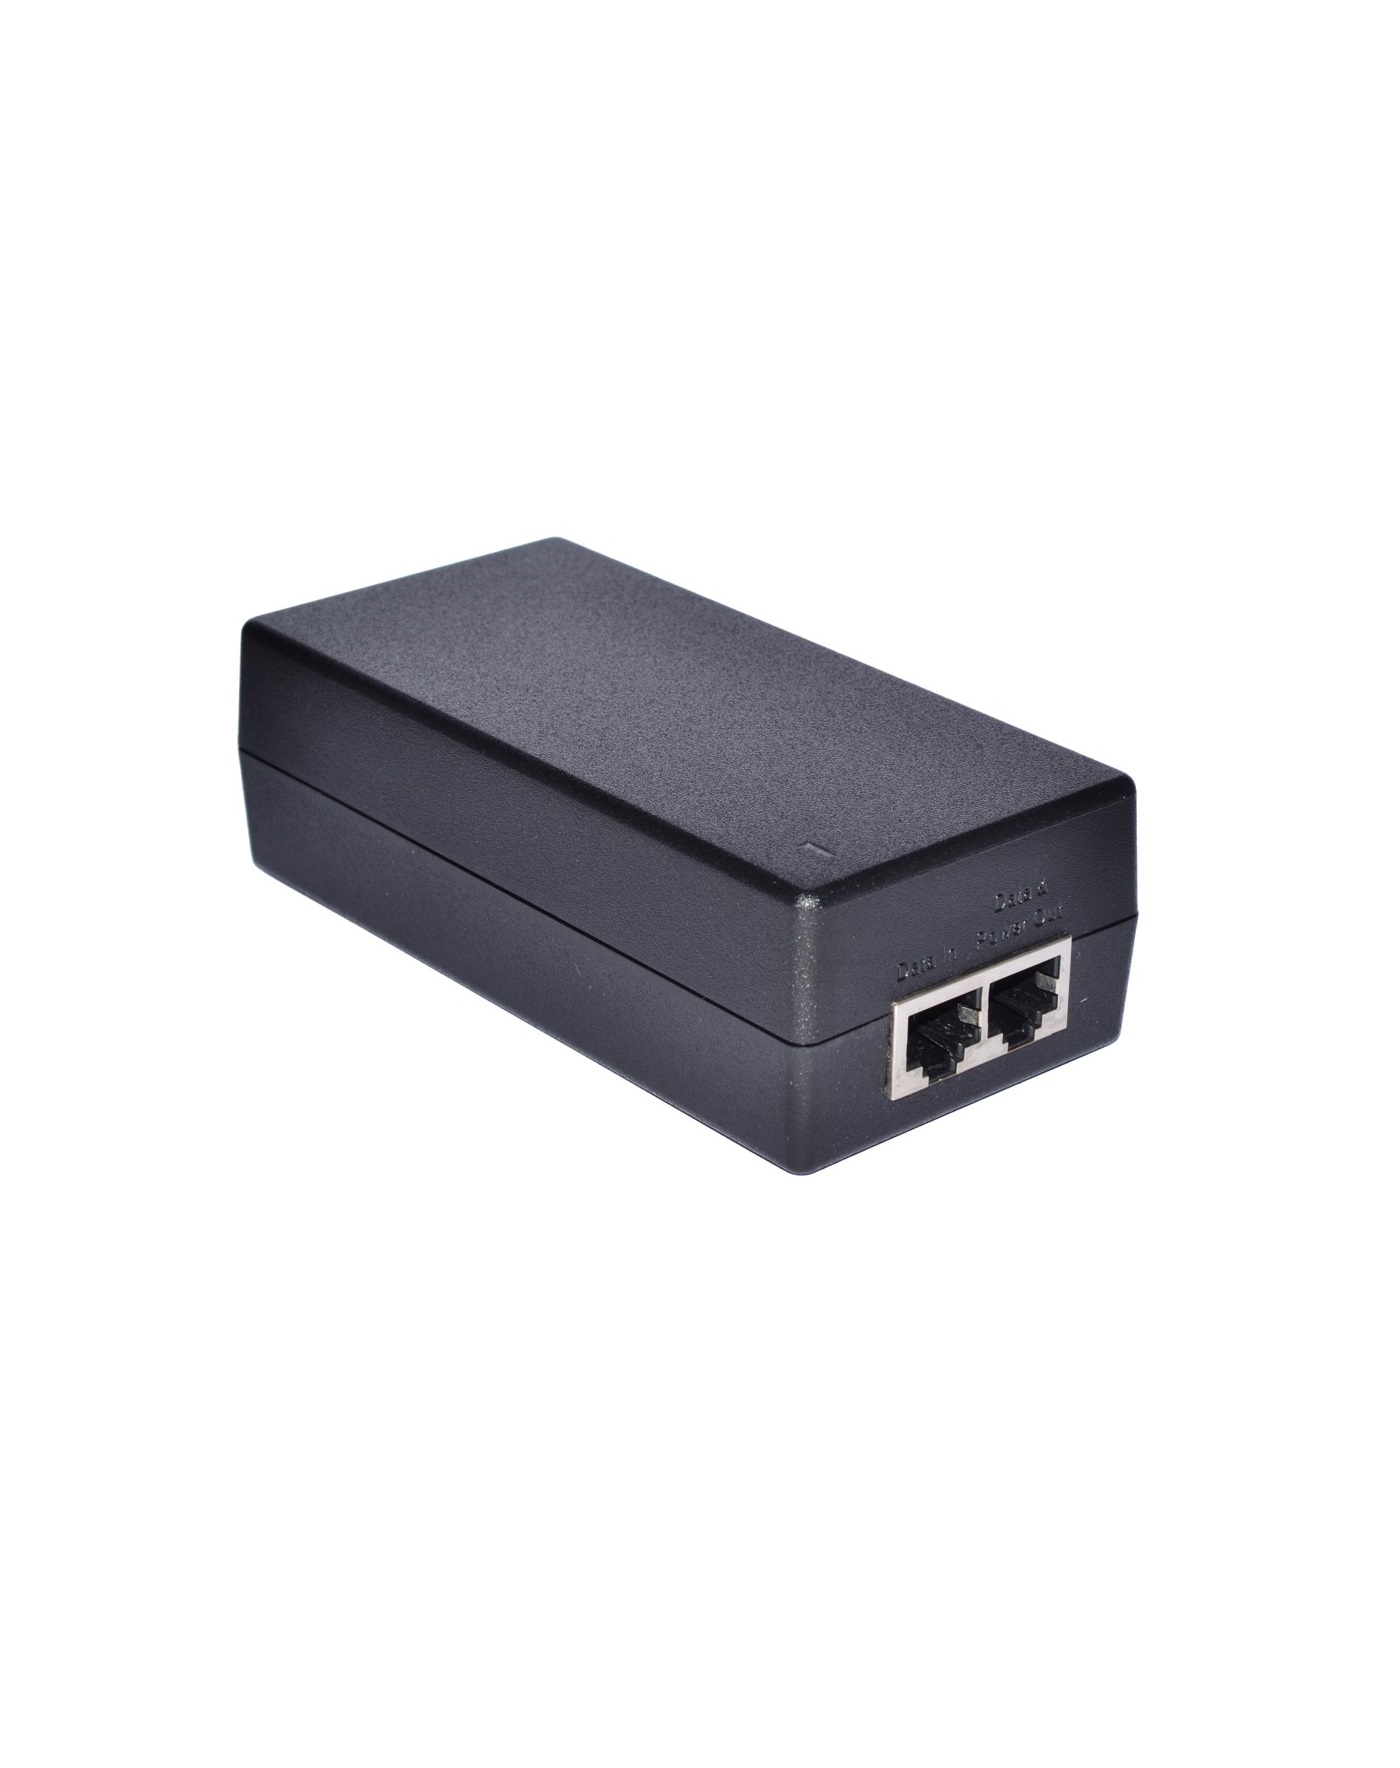 1G / 10G PoE(Power Over Ethernet) Adapter series